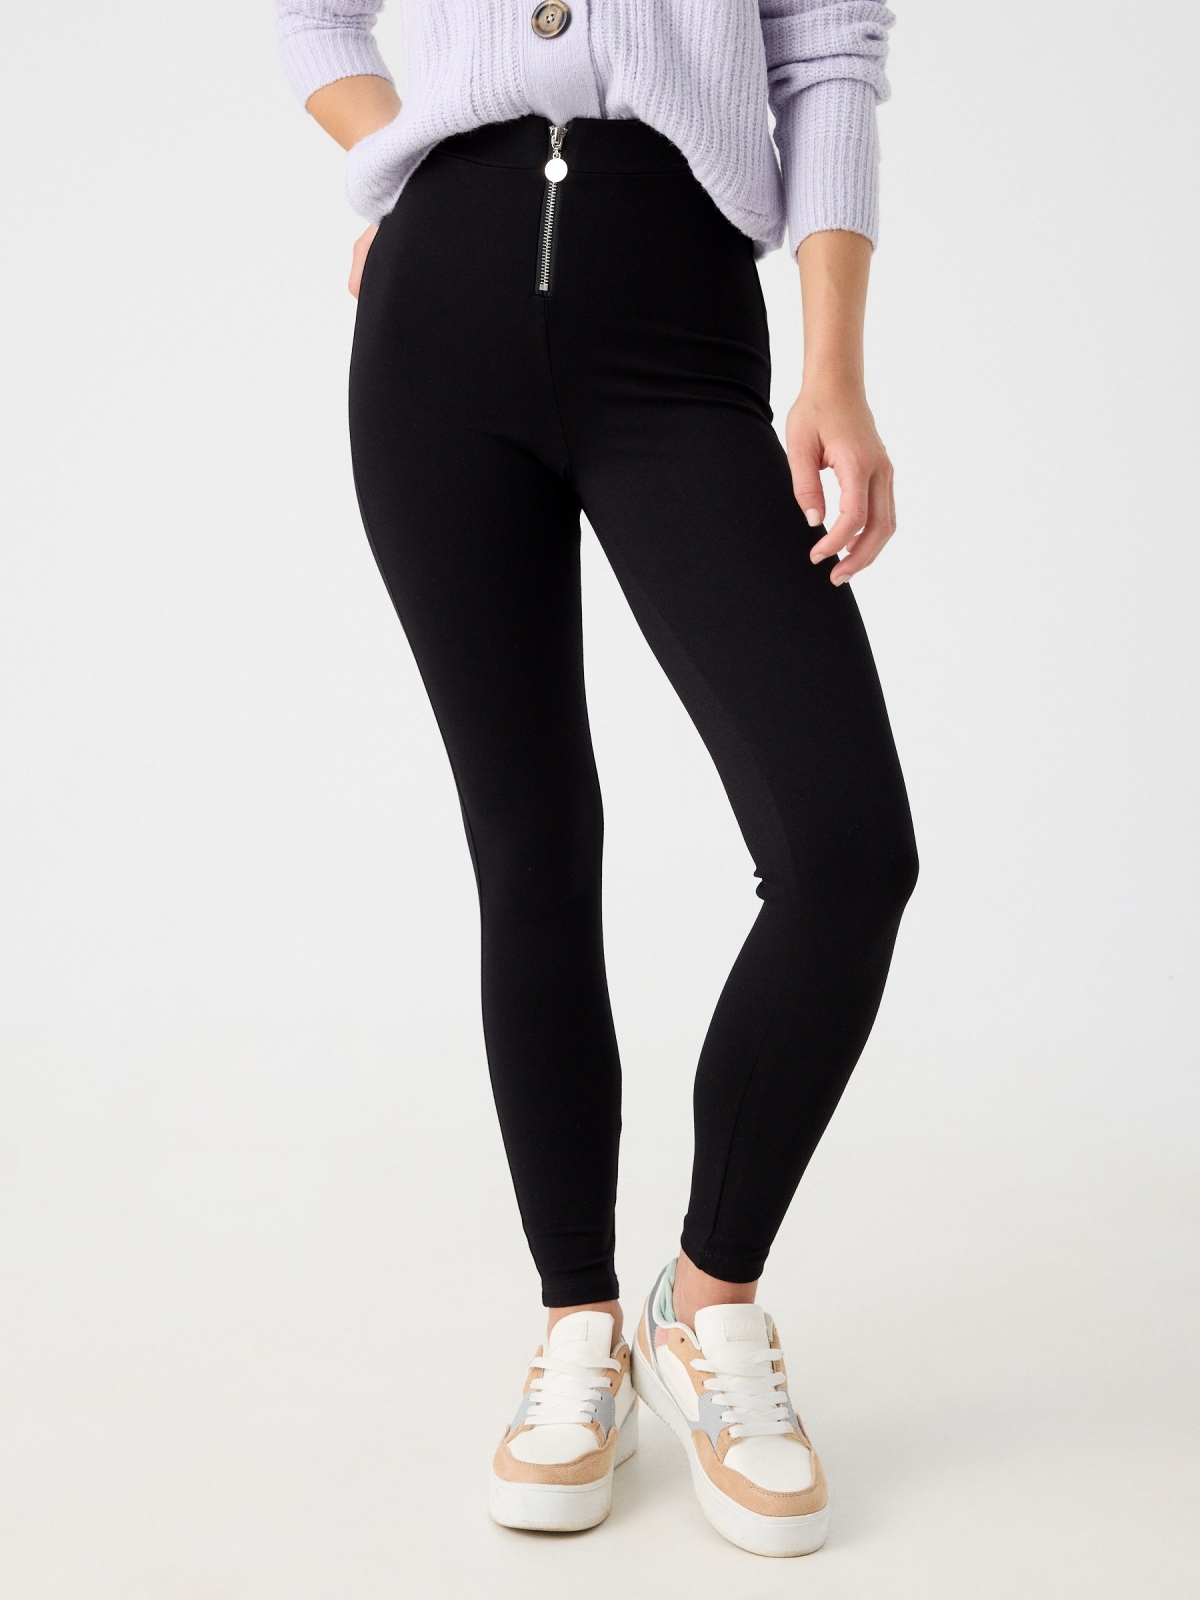 High-waisted zip-up leggings black middle front view